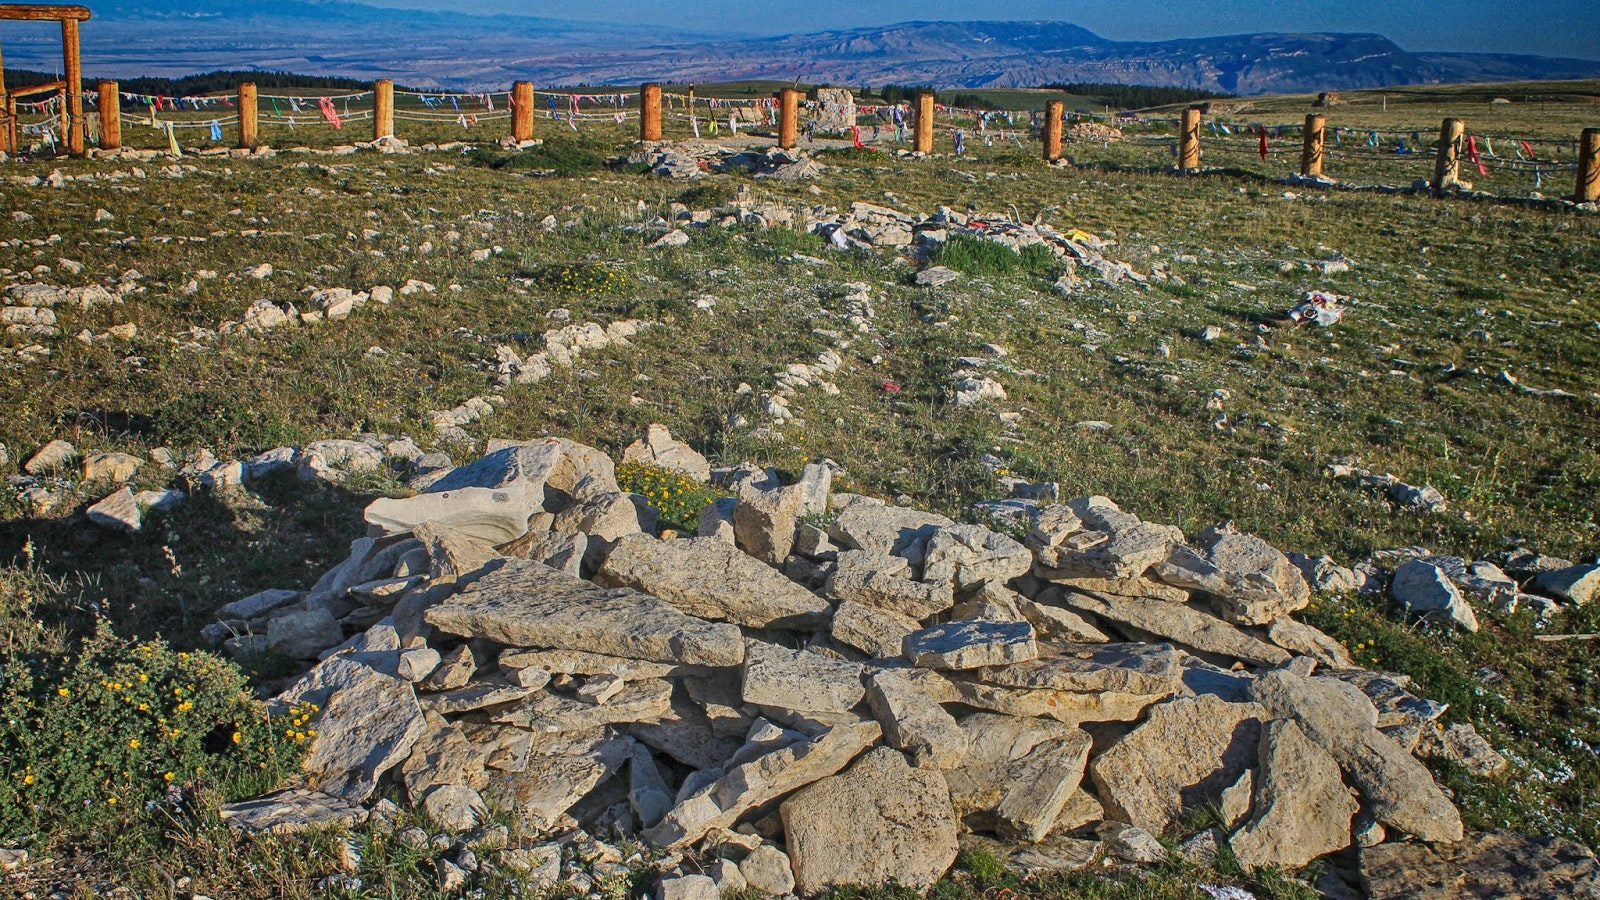 One of the biggest cairns, looking north. The Beartooth Mountains in southern Montana are in the left distance.